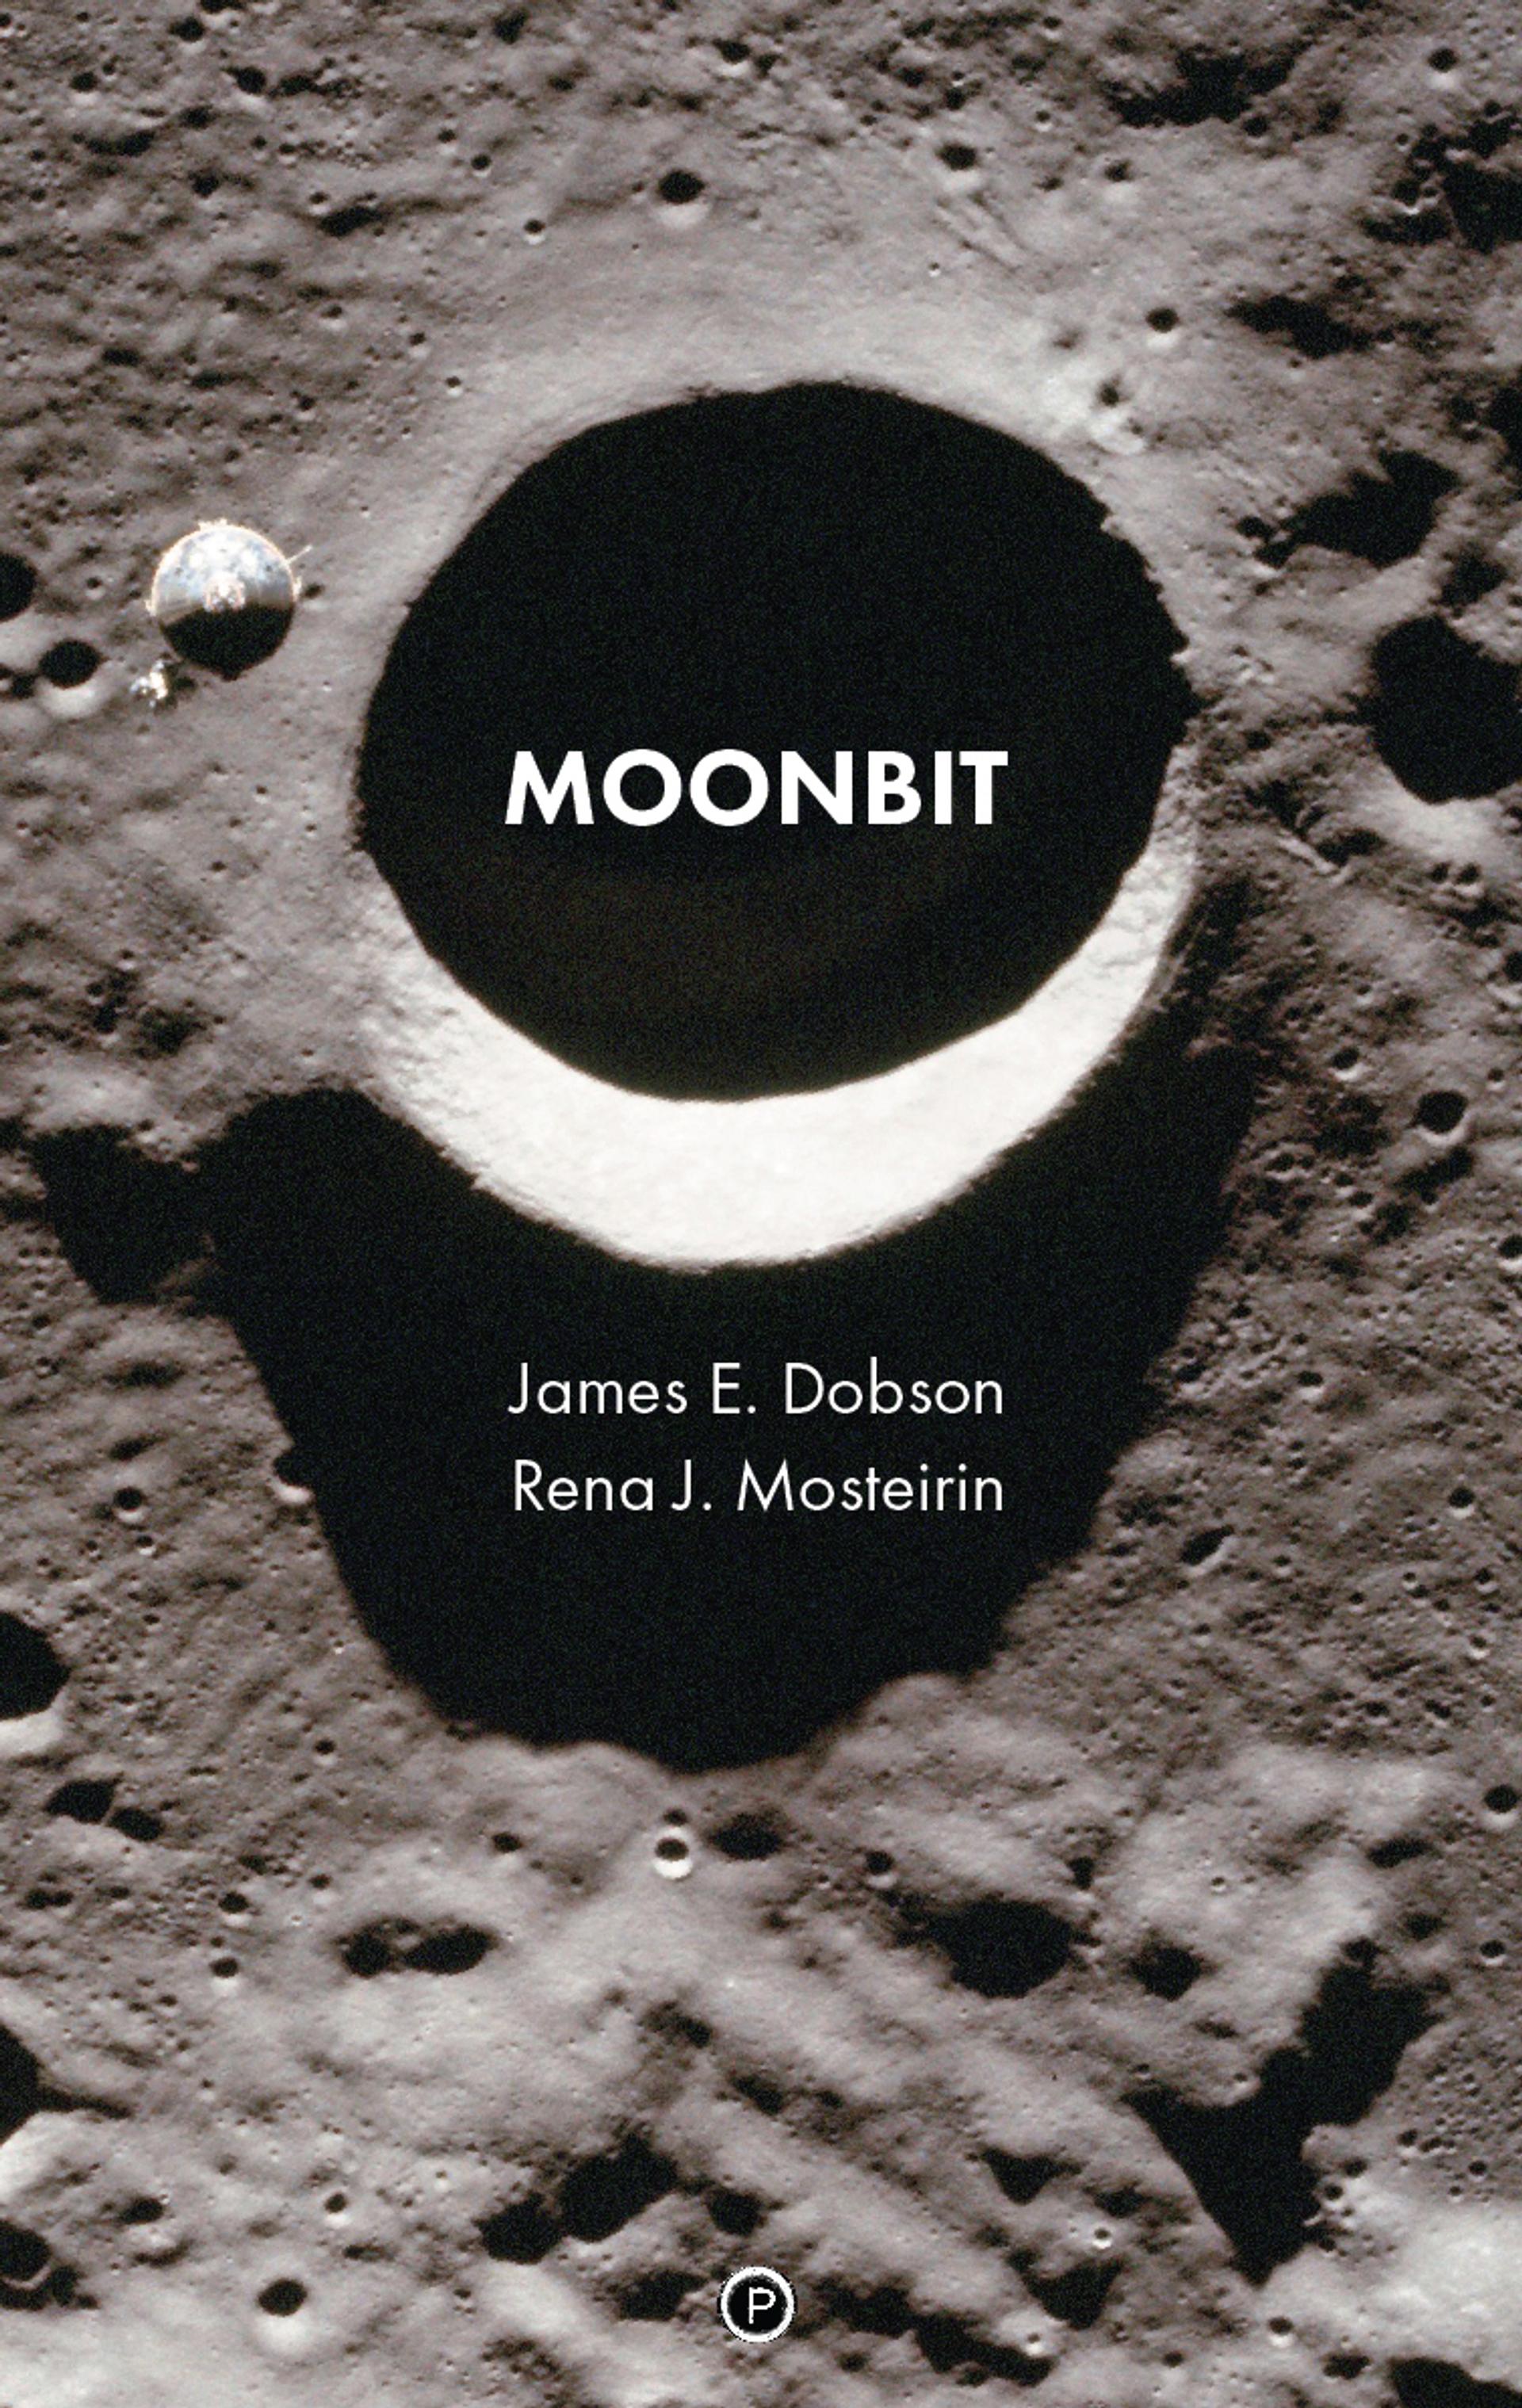 Cover of book titled Moonbit